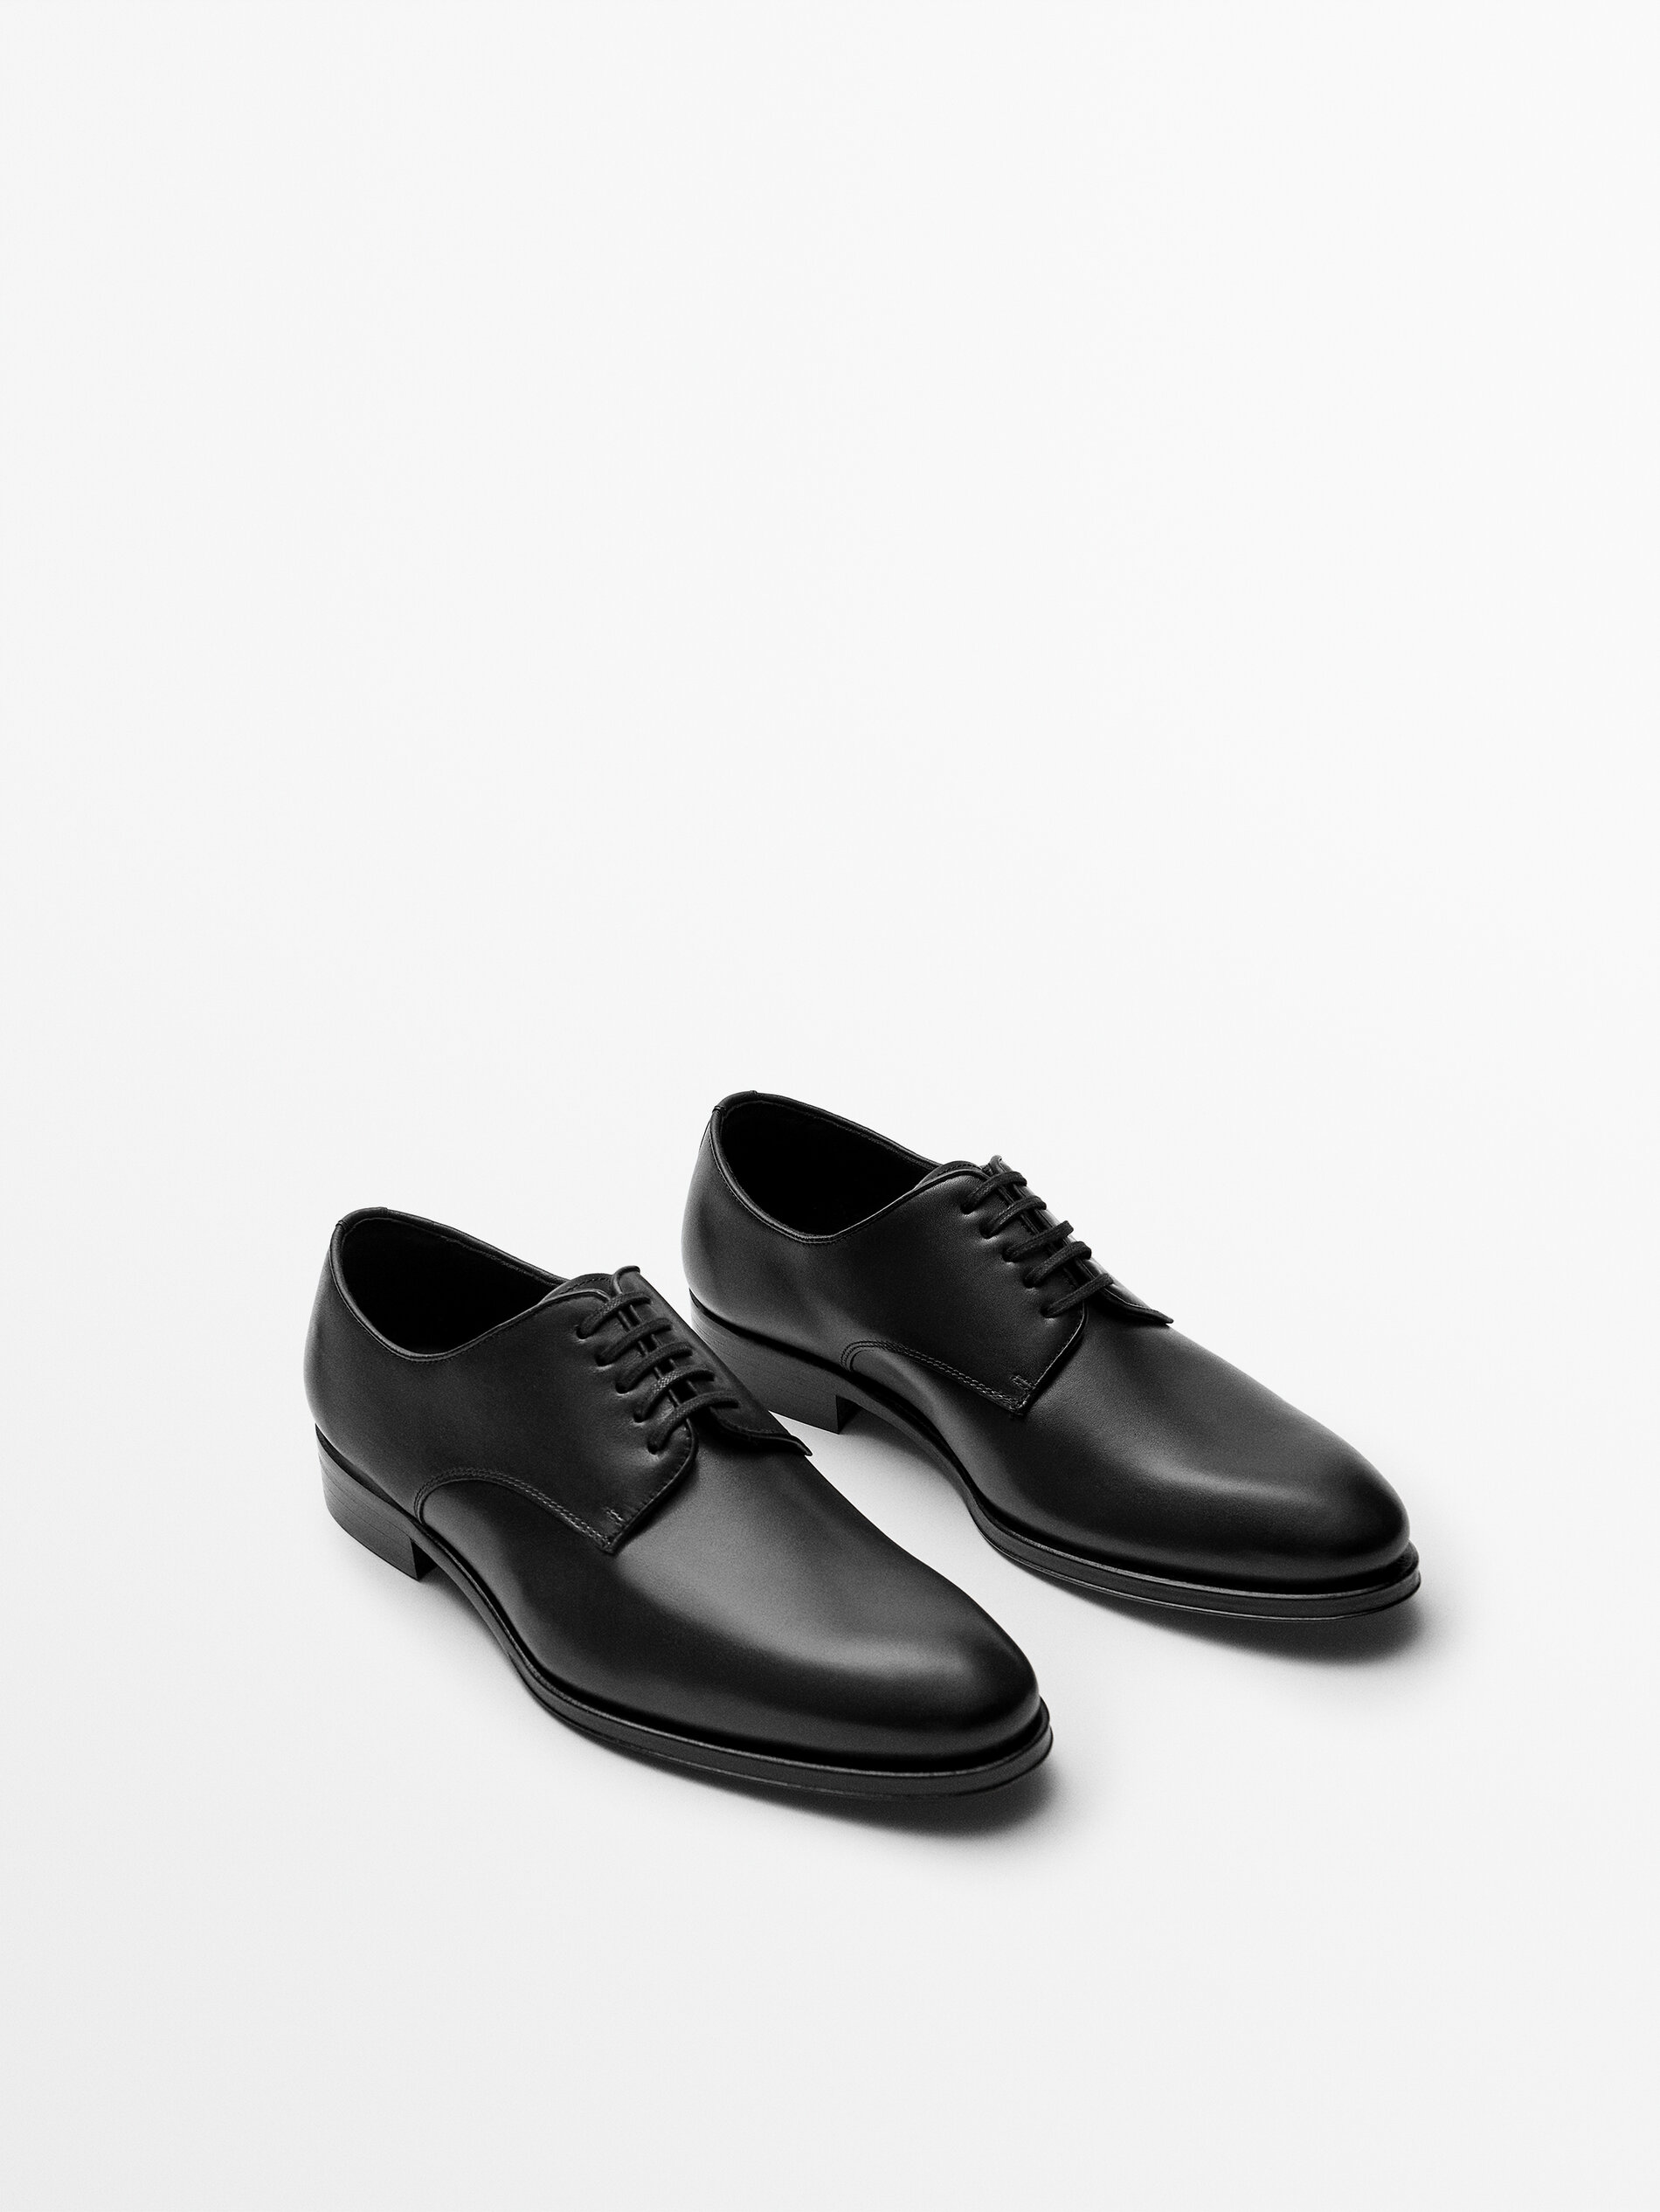 BLACK LEATHER DERBY SHOES - Massimo ...